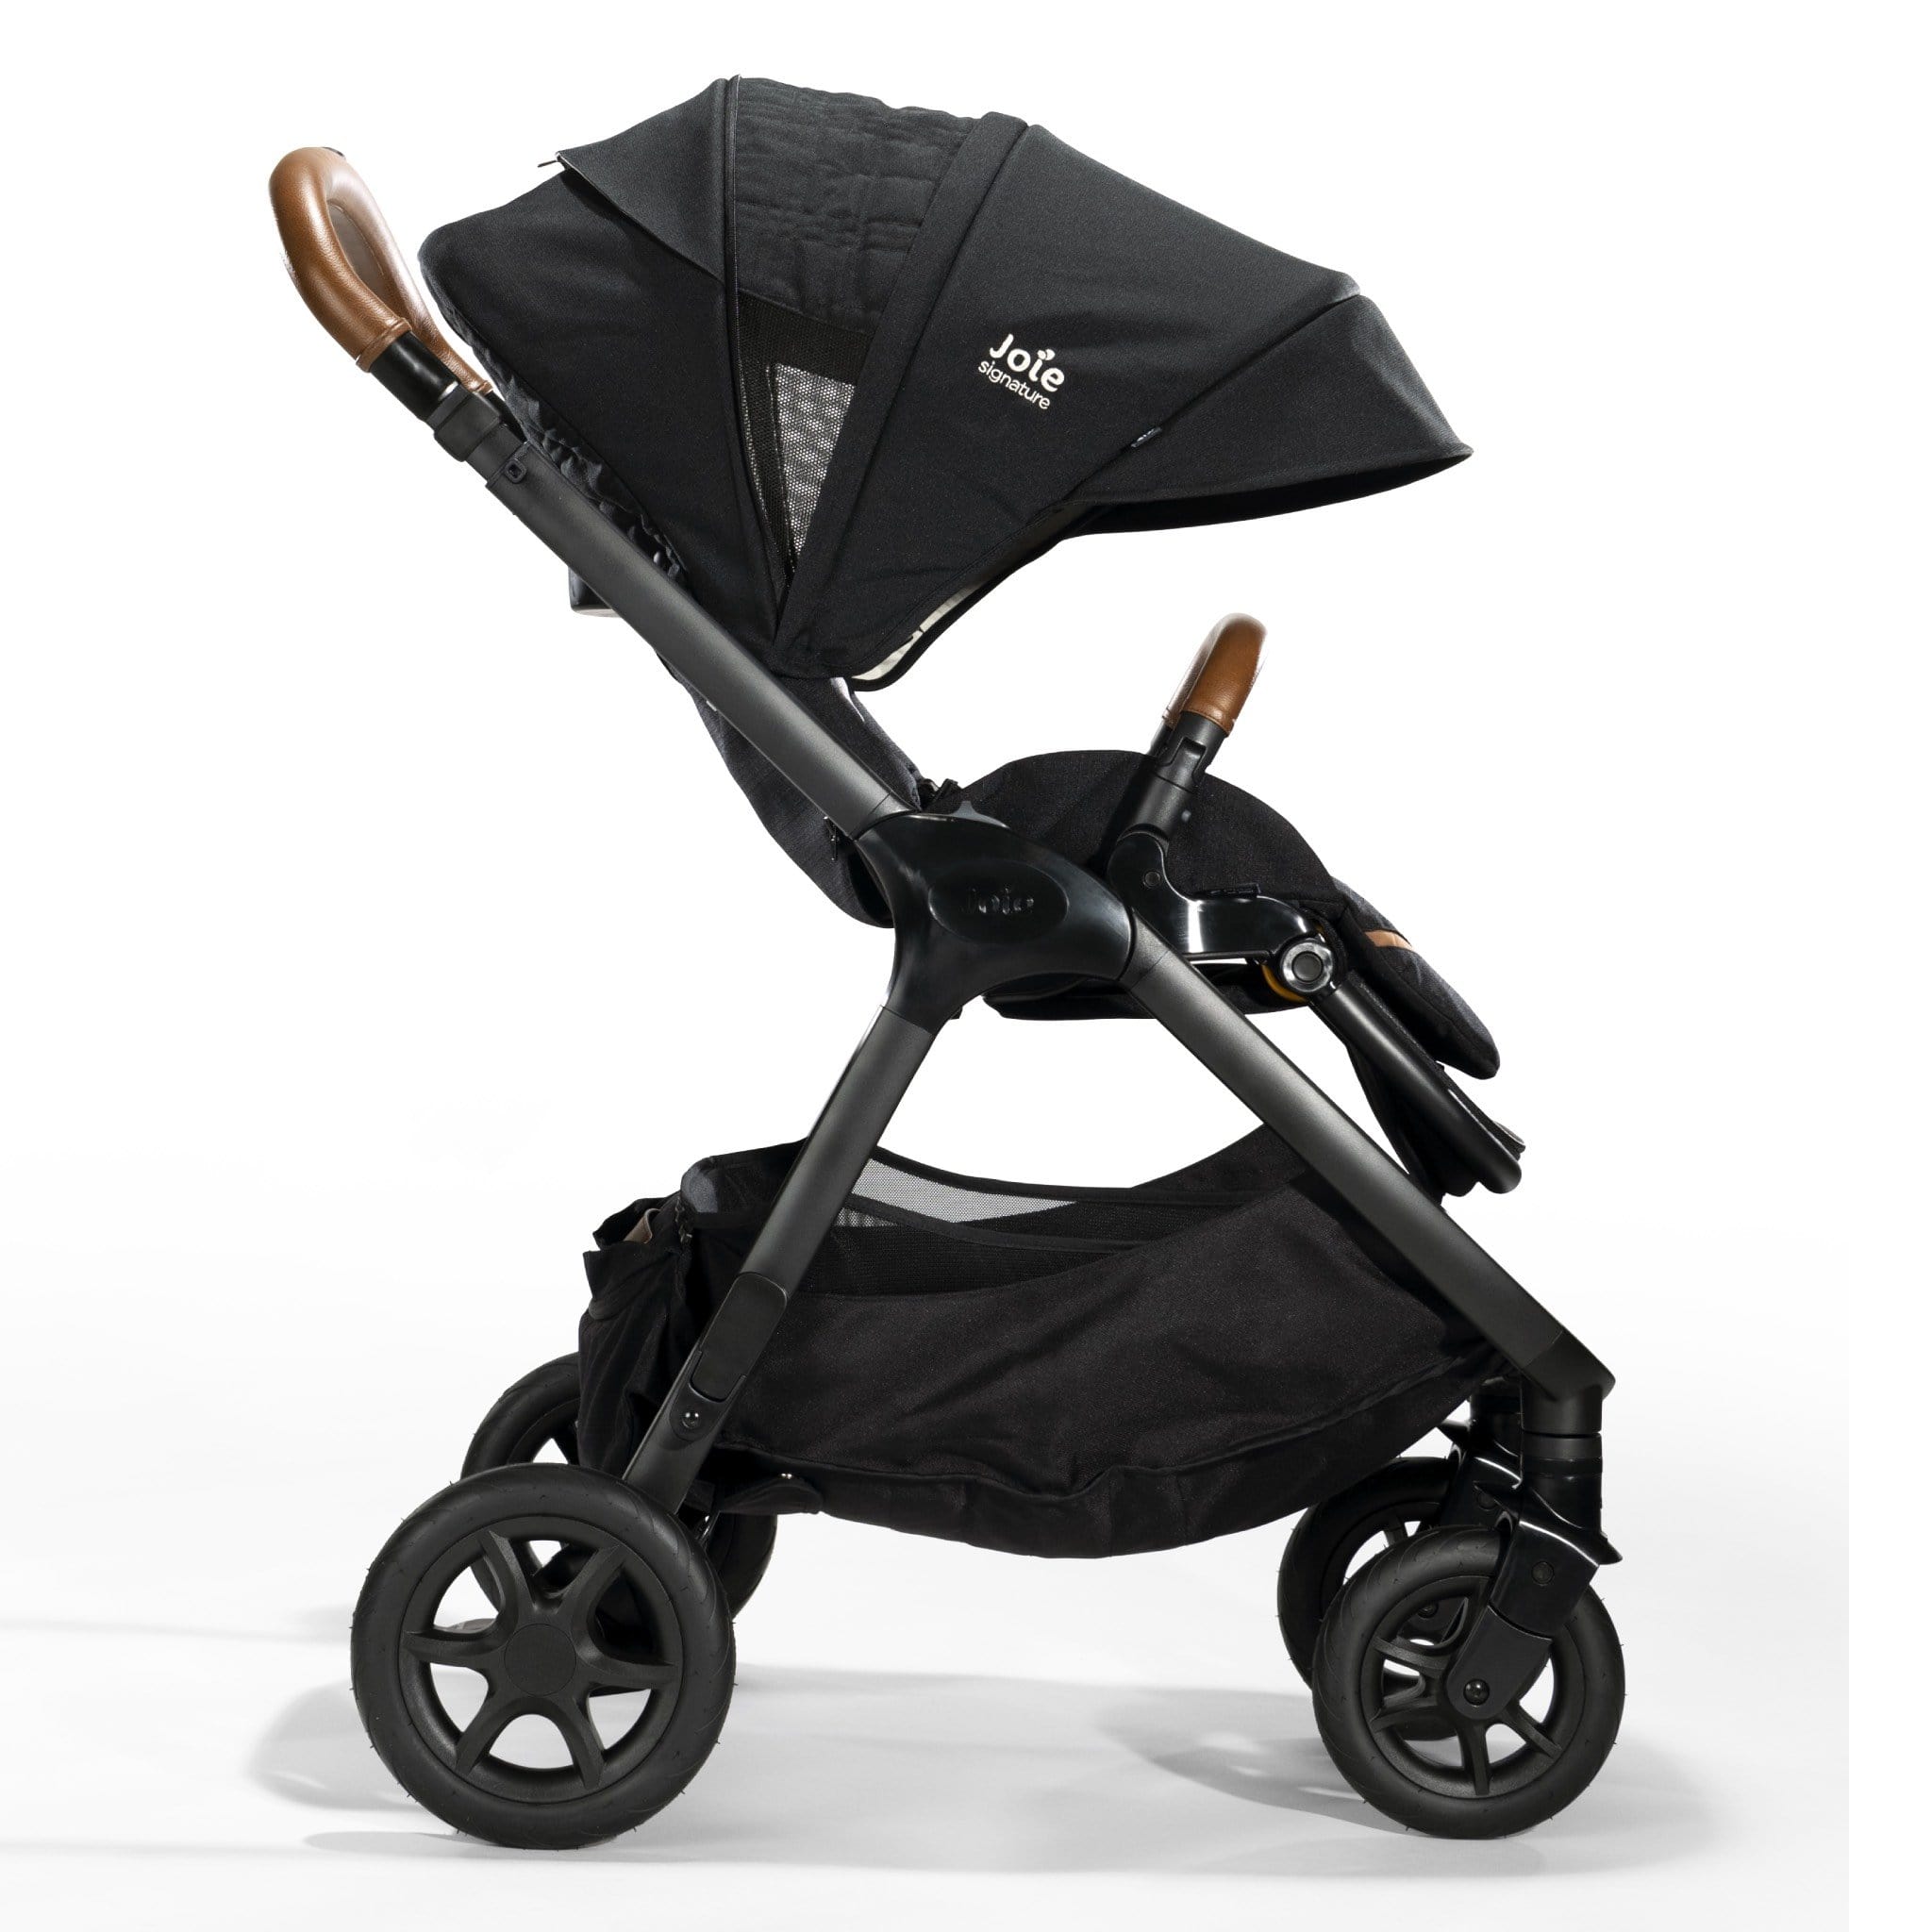 Joie baby prams Joie Finiti 4in1 Signature Edition Pushchair & Carrycot Eclipse 9300-ECL